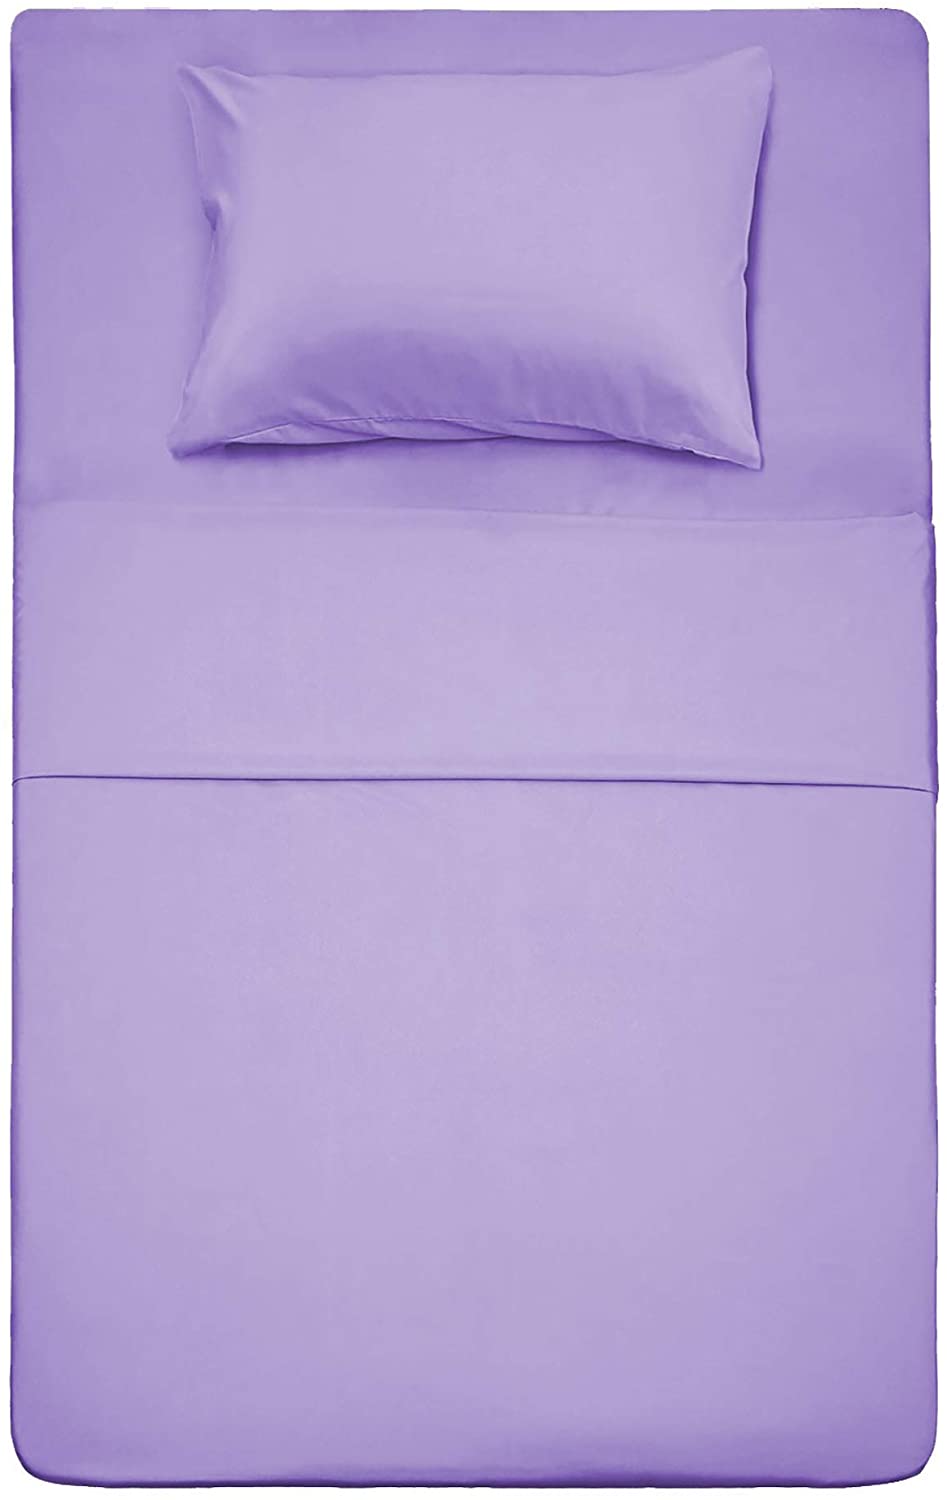 Twin Size Bed Sheet Set - 3 Piece (Lavender) 1 Flat Sheet,1 Fitted Sheet and 1 P